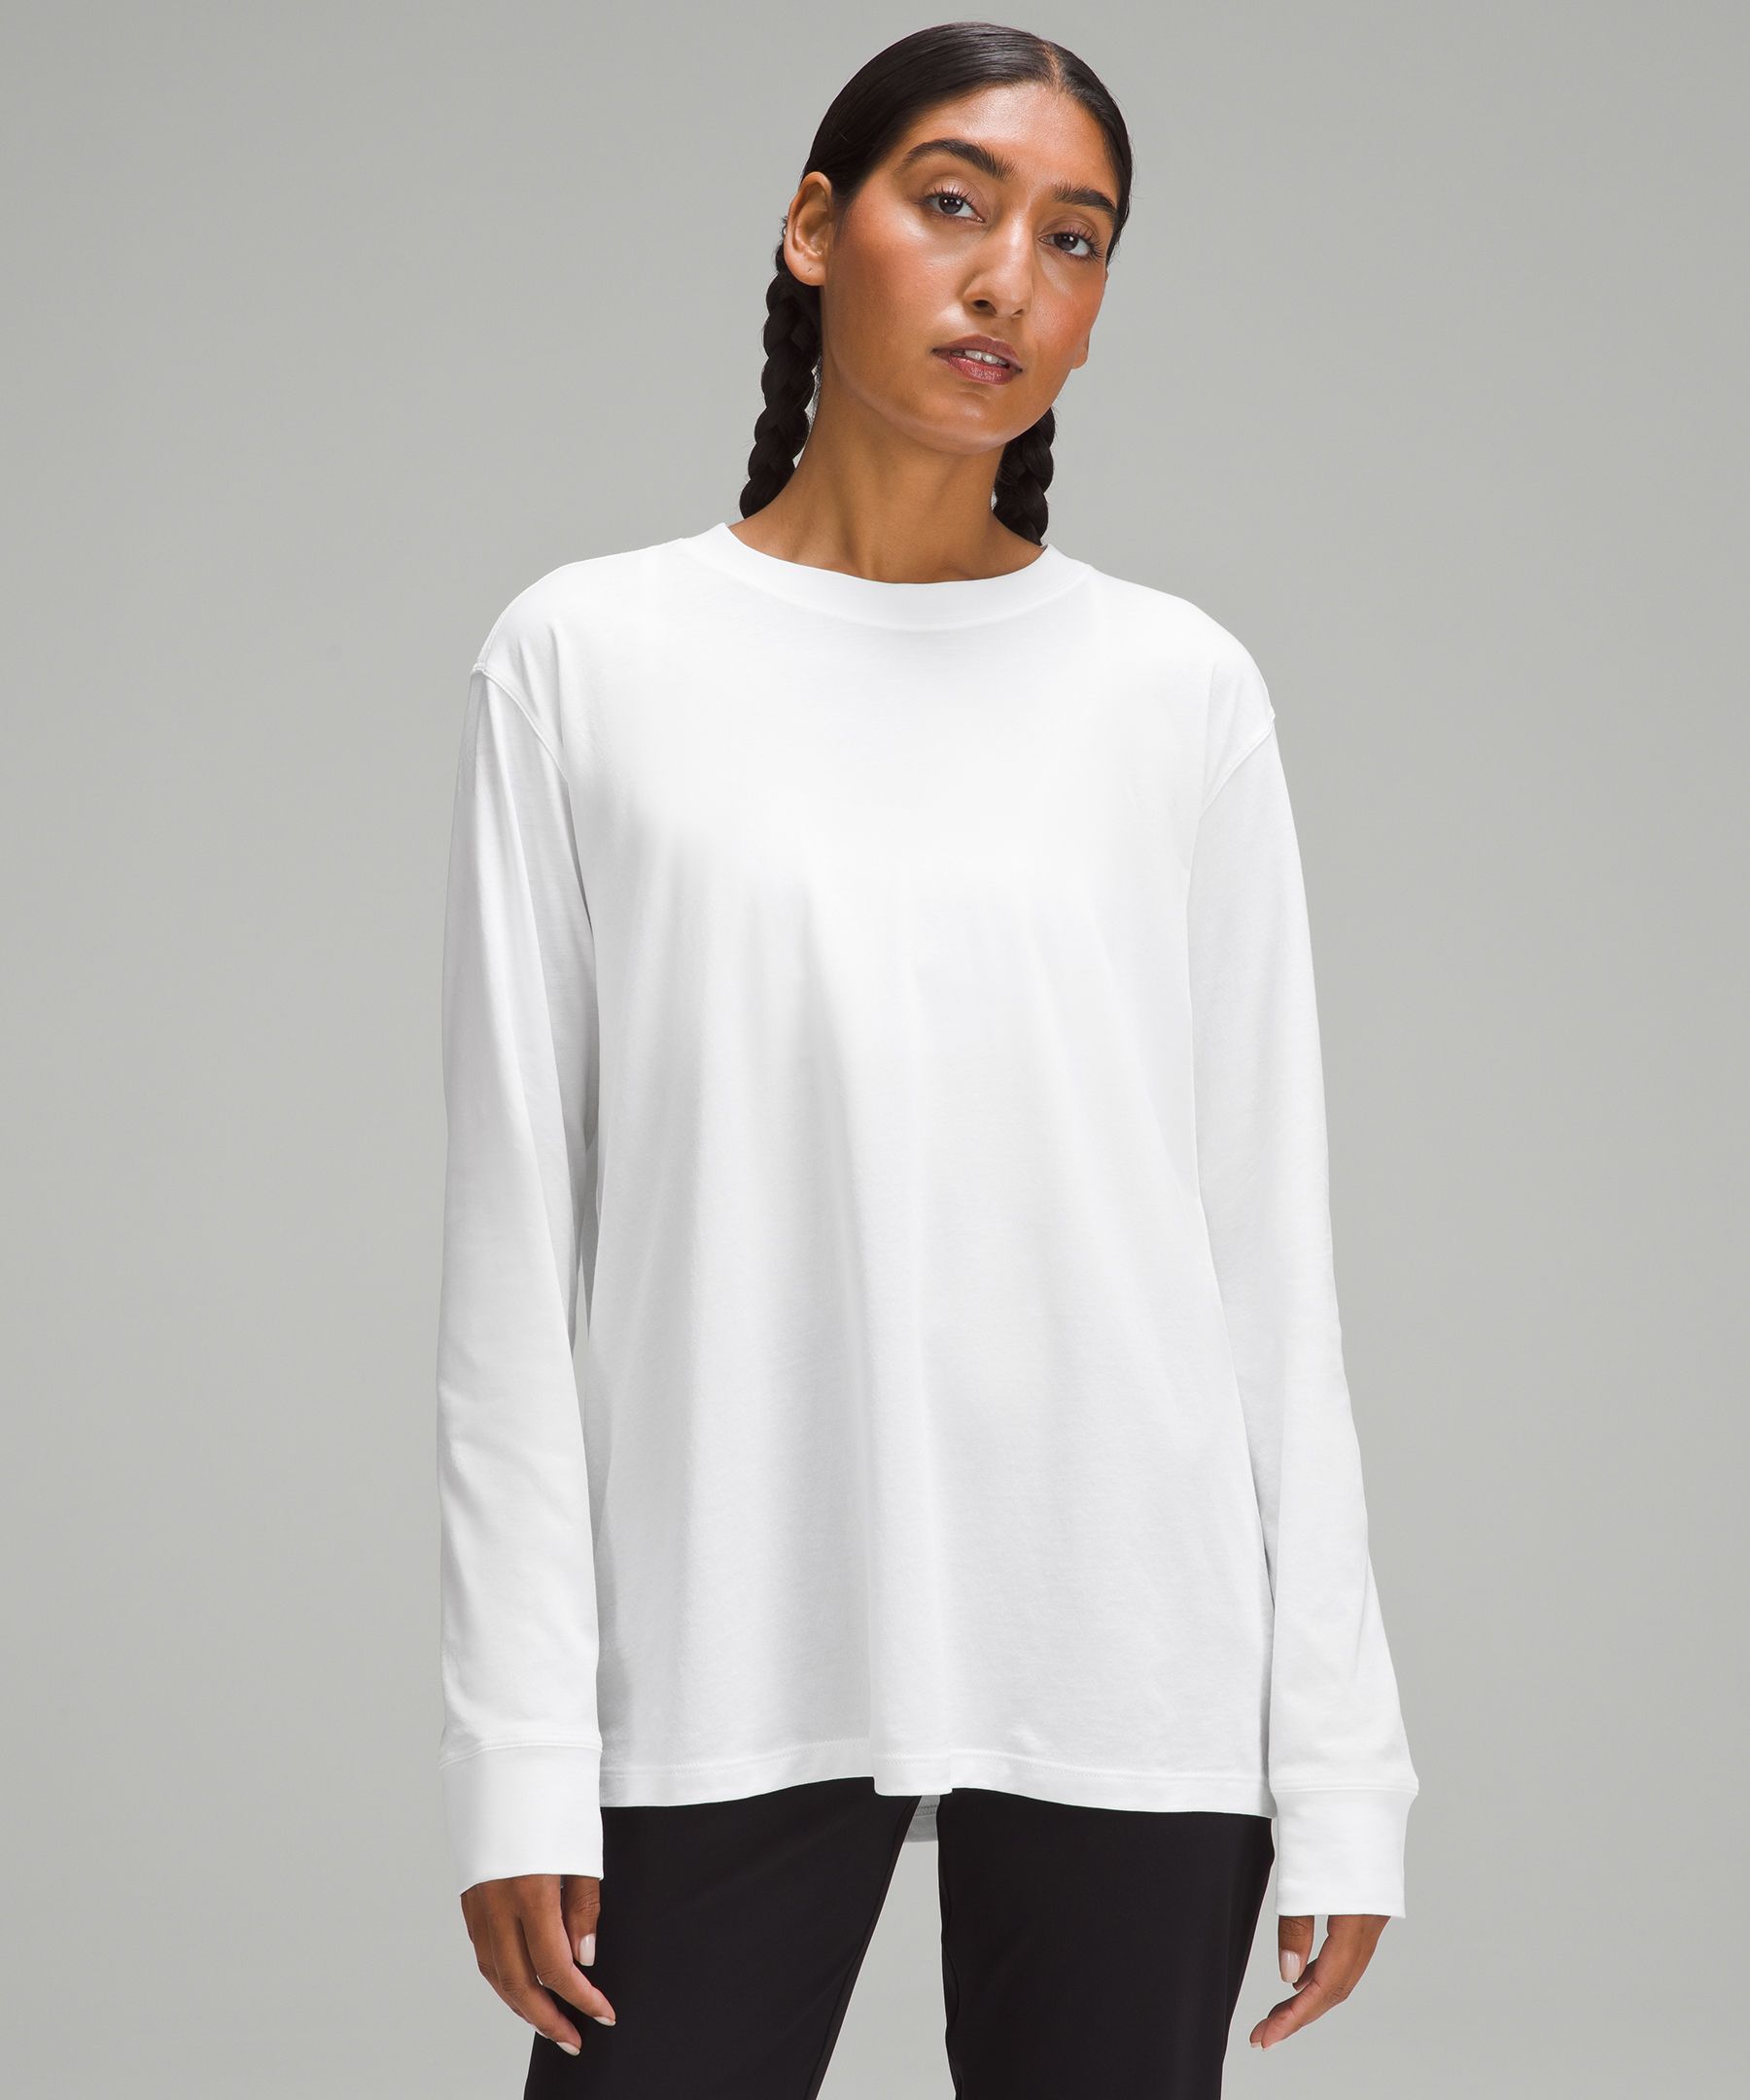 lululemon athletica, Tops, Lululemon Long Sleeve W Mantras White See  Through Limited Edition Size 4